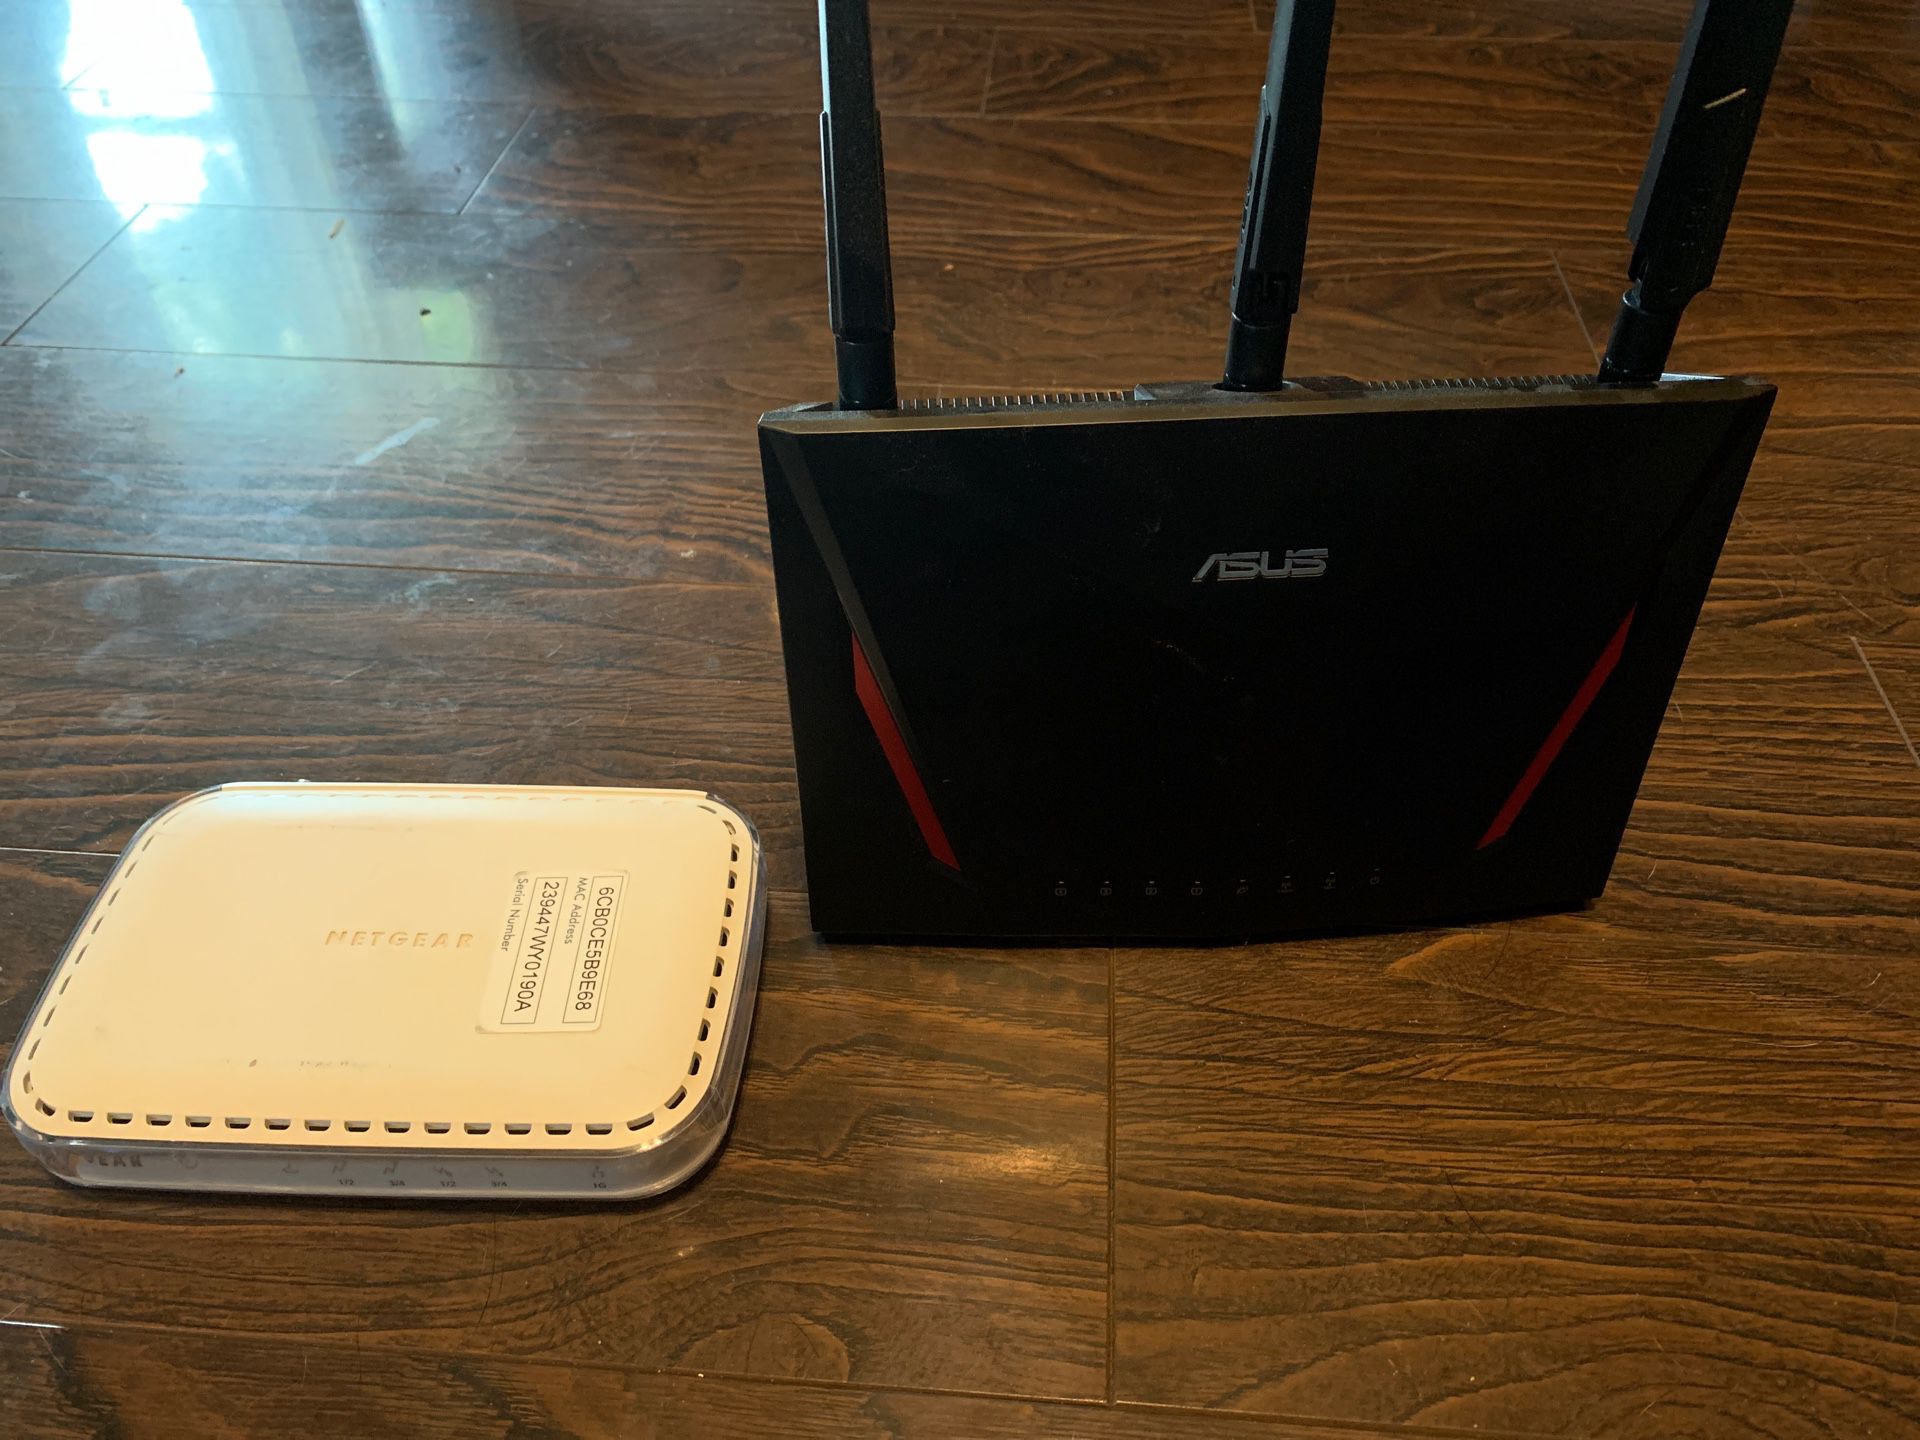 Comcast cable modem and Asus gigabit Wi-Fi router